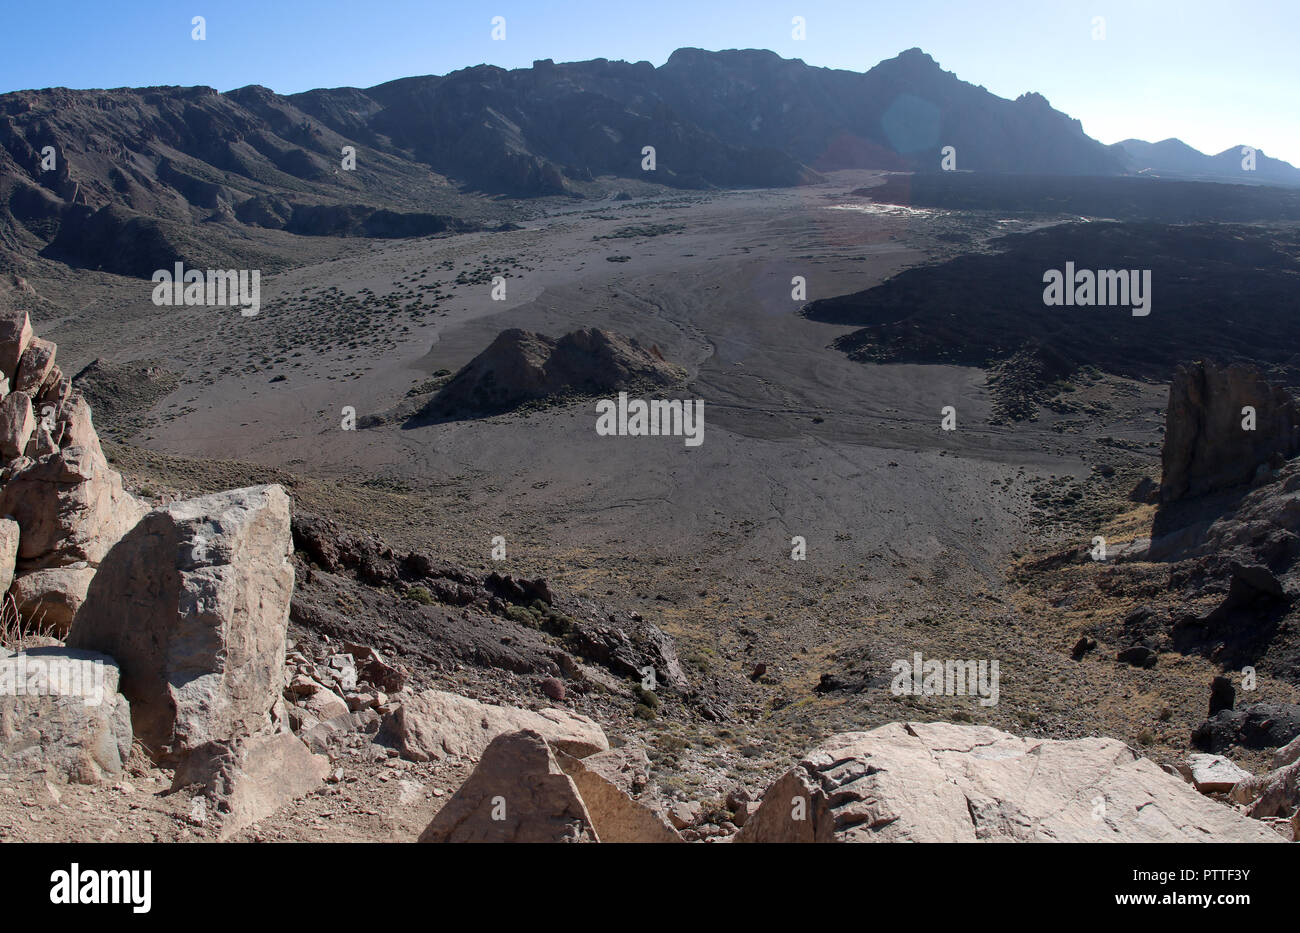 Volcanic landscape at the Mirador Roques de Garcia on the way to the Pico del Teide on the Canary Island of Tenerife on 18.09.2018. The rock formation Roques de Garcia is located about five kilometers south of the summit of Teide at an altitude of about 2200 m at the edge of the extensive Caldera Las Ca-adas. The area is part of the Teide National Park (Parque Nacional del Teide). The Pico del Teide (also Teyde) is with 3718 m the highest elevation on the Canary Island of Tenerife and the highest mountain in Spain. It belongs to the municipality of La Orotava. In 2007, the territory of the Nat Stock Photo